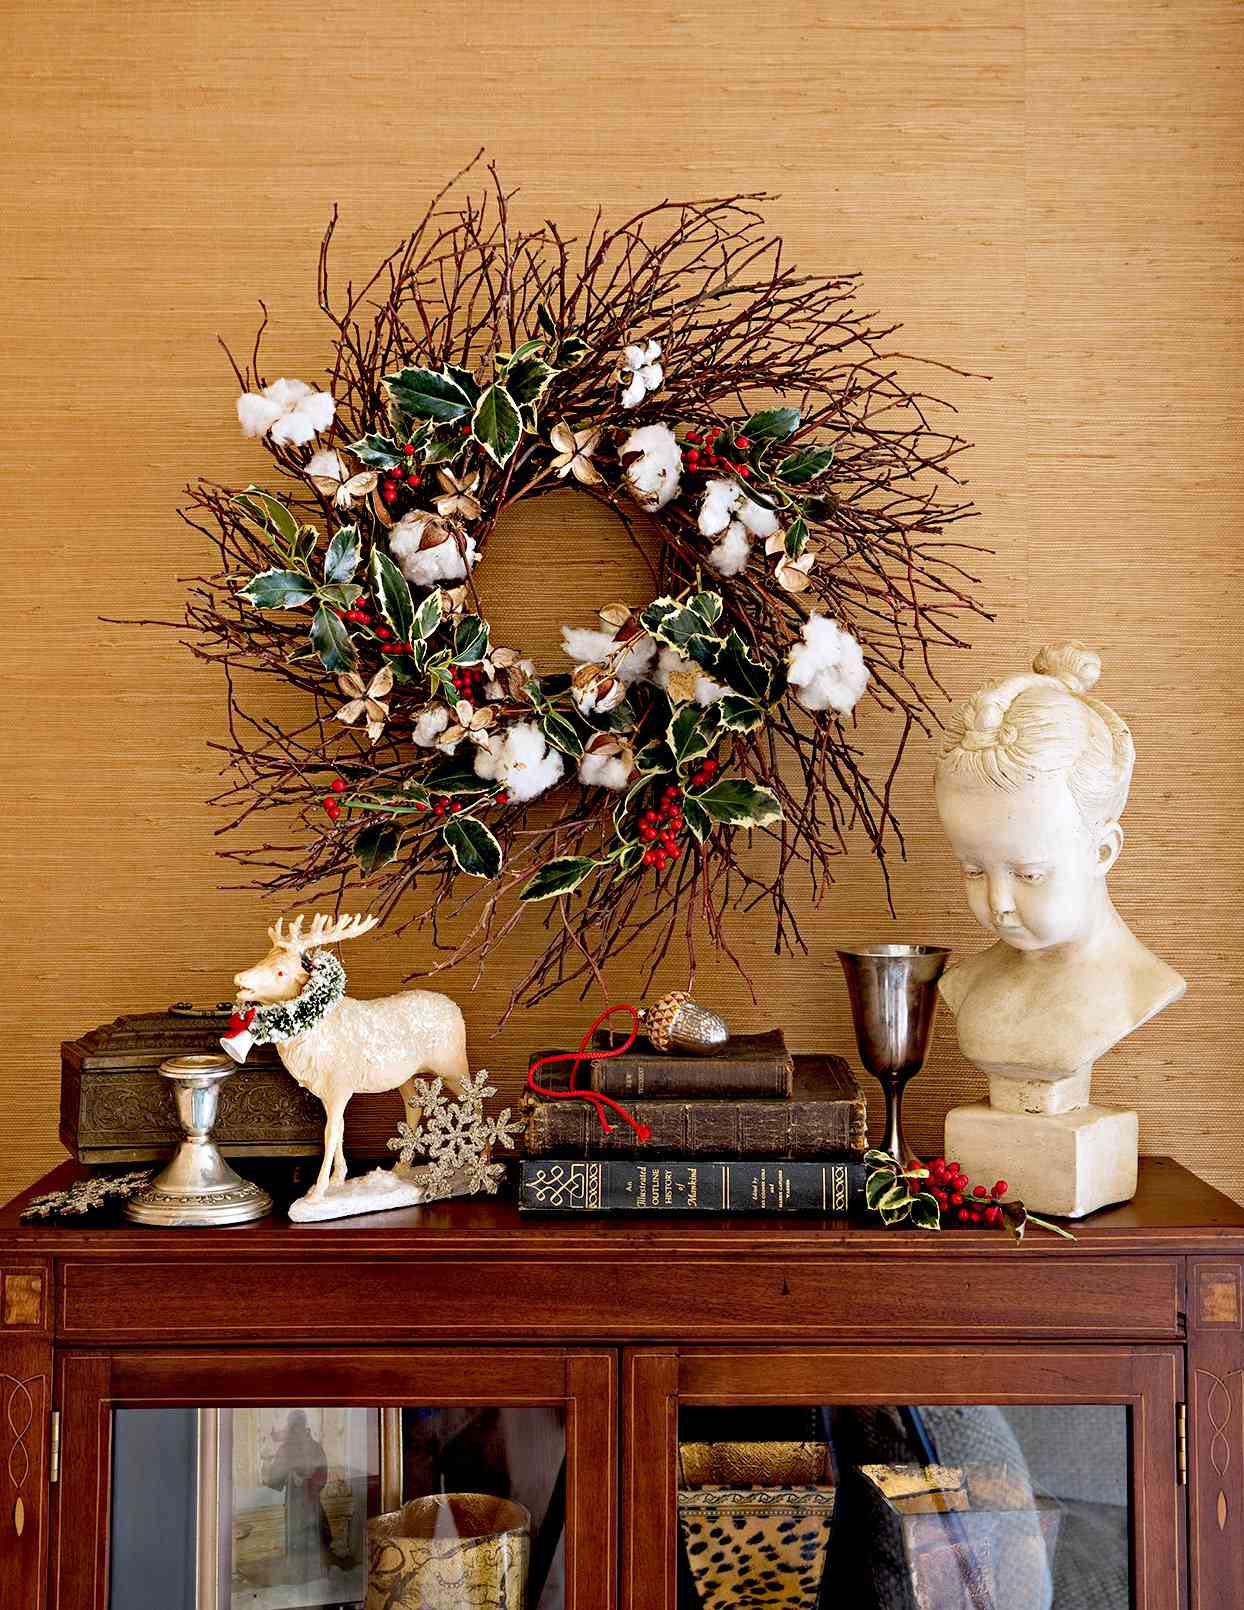 Wooden shelf with wreath made of branches and cotton above